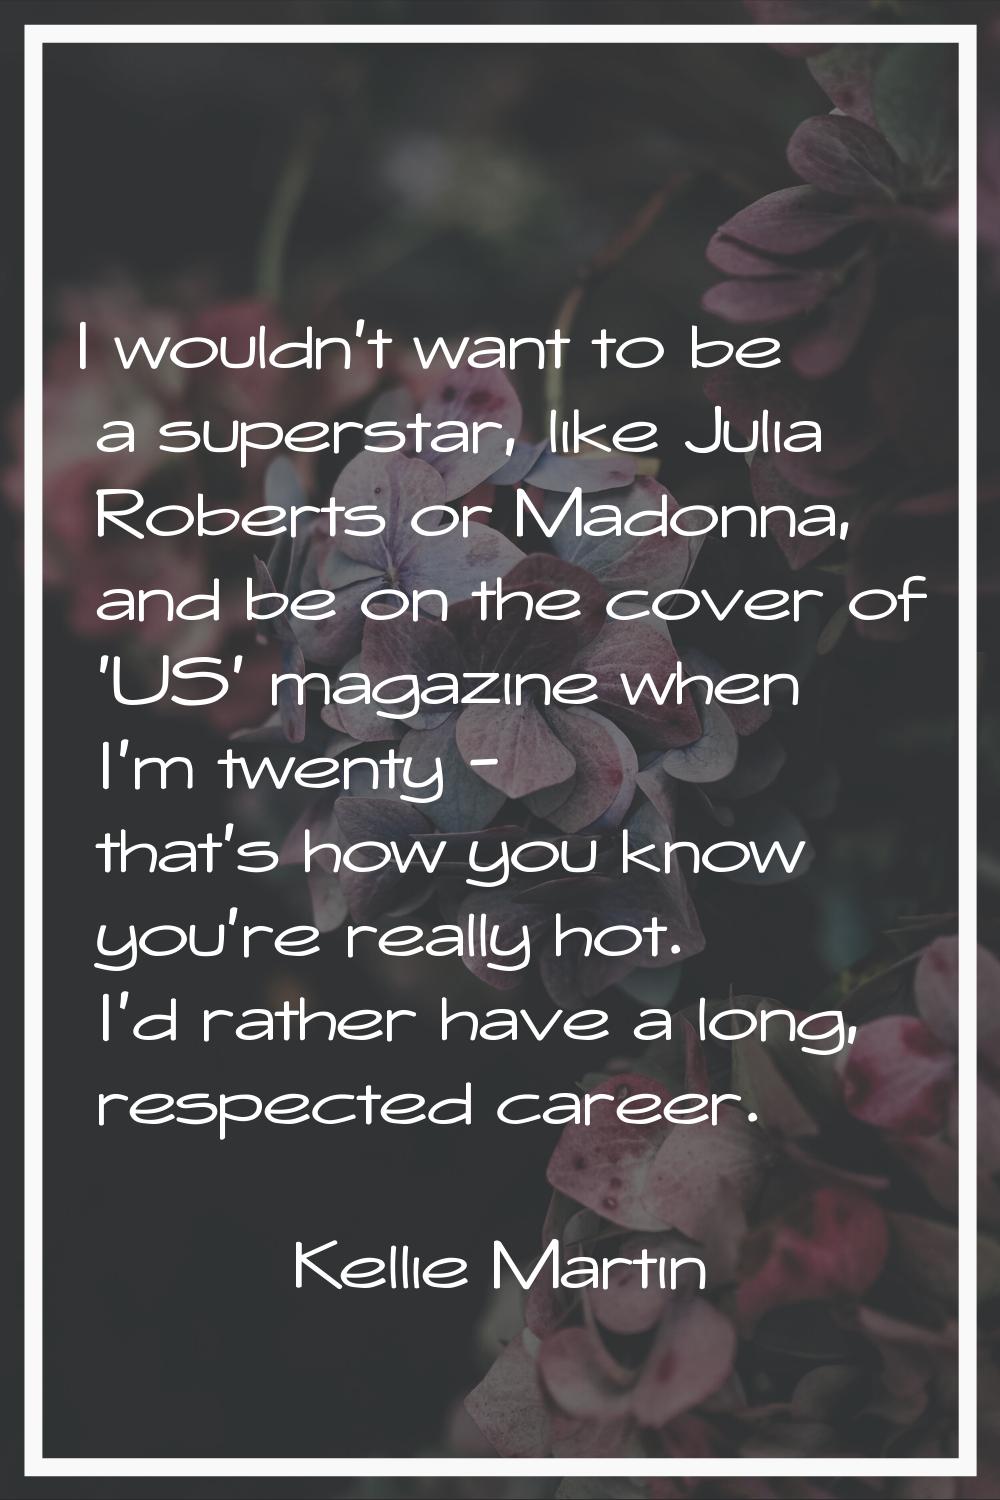 I wouldn't want to be a superstar, like Julia Roberts or Madonna, and be on the cover of 'US' magaz